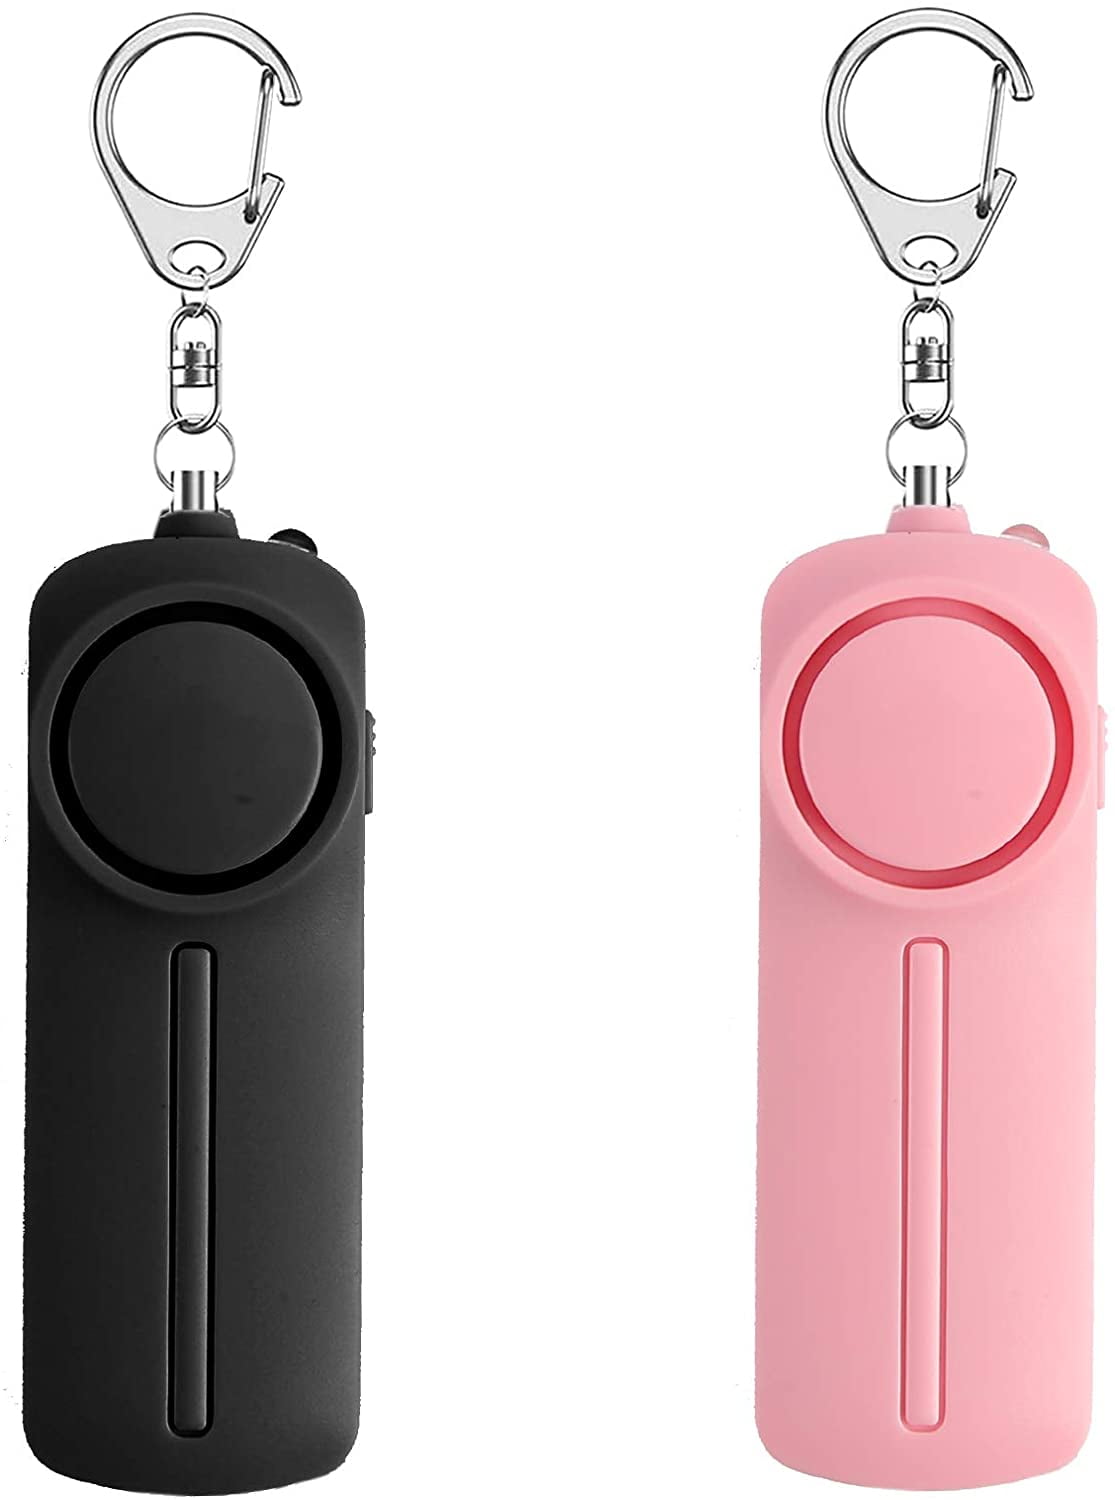 2Pack Emergency Personal Alarm Keychain with LED Flashlight,Self Defense SOS Alarm,130dB Security Self Defense Electronic Device for Elderly Kids Student Women Teen Girls Night Workers. 